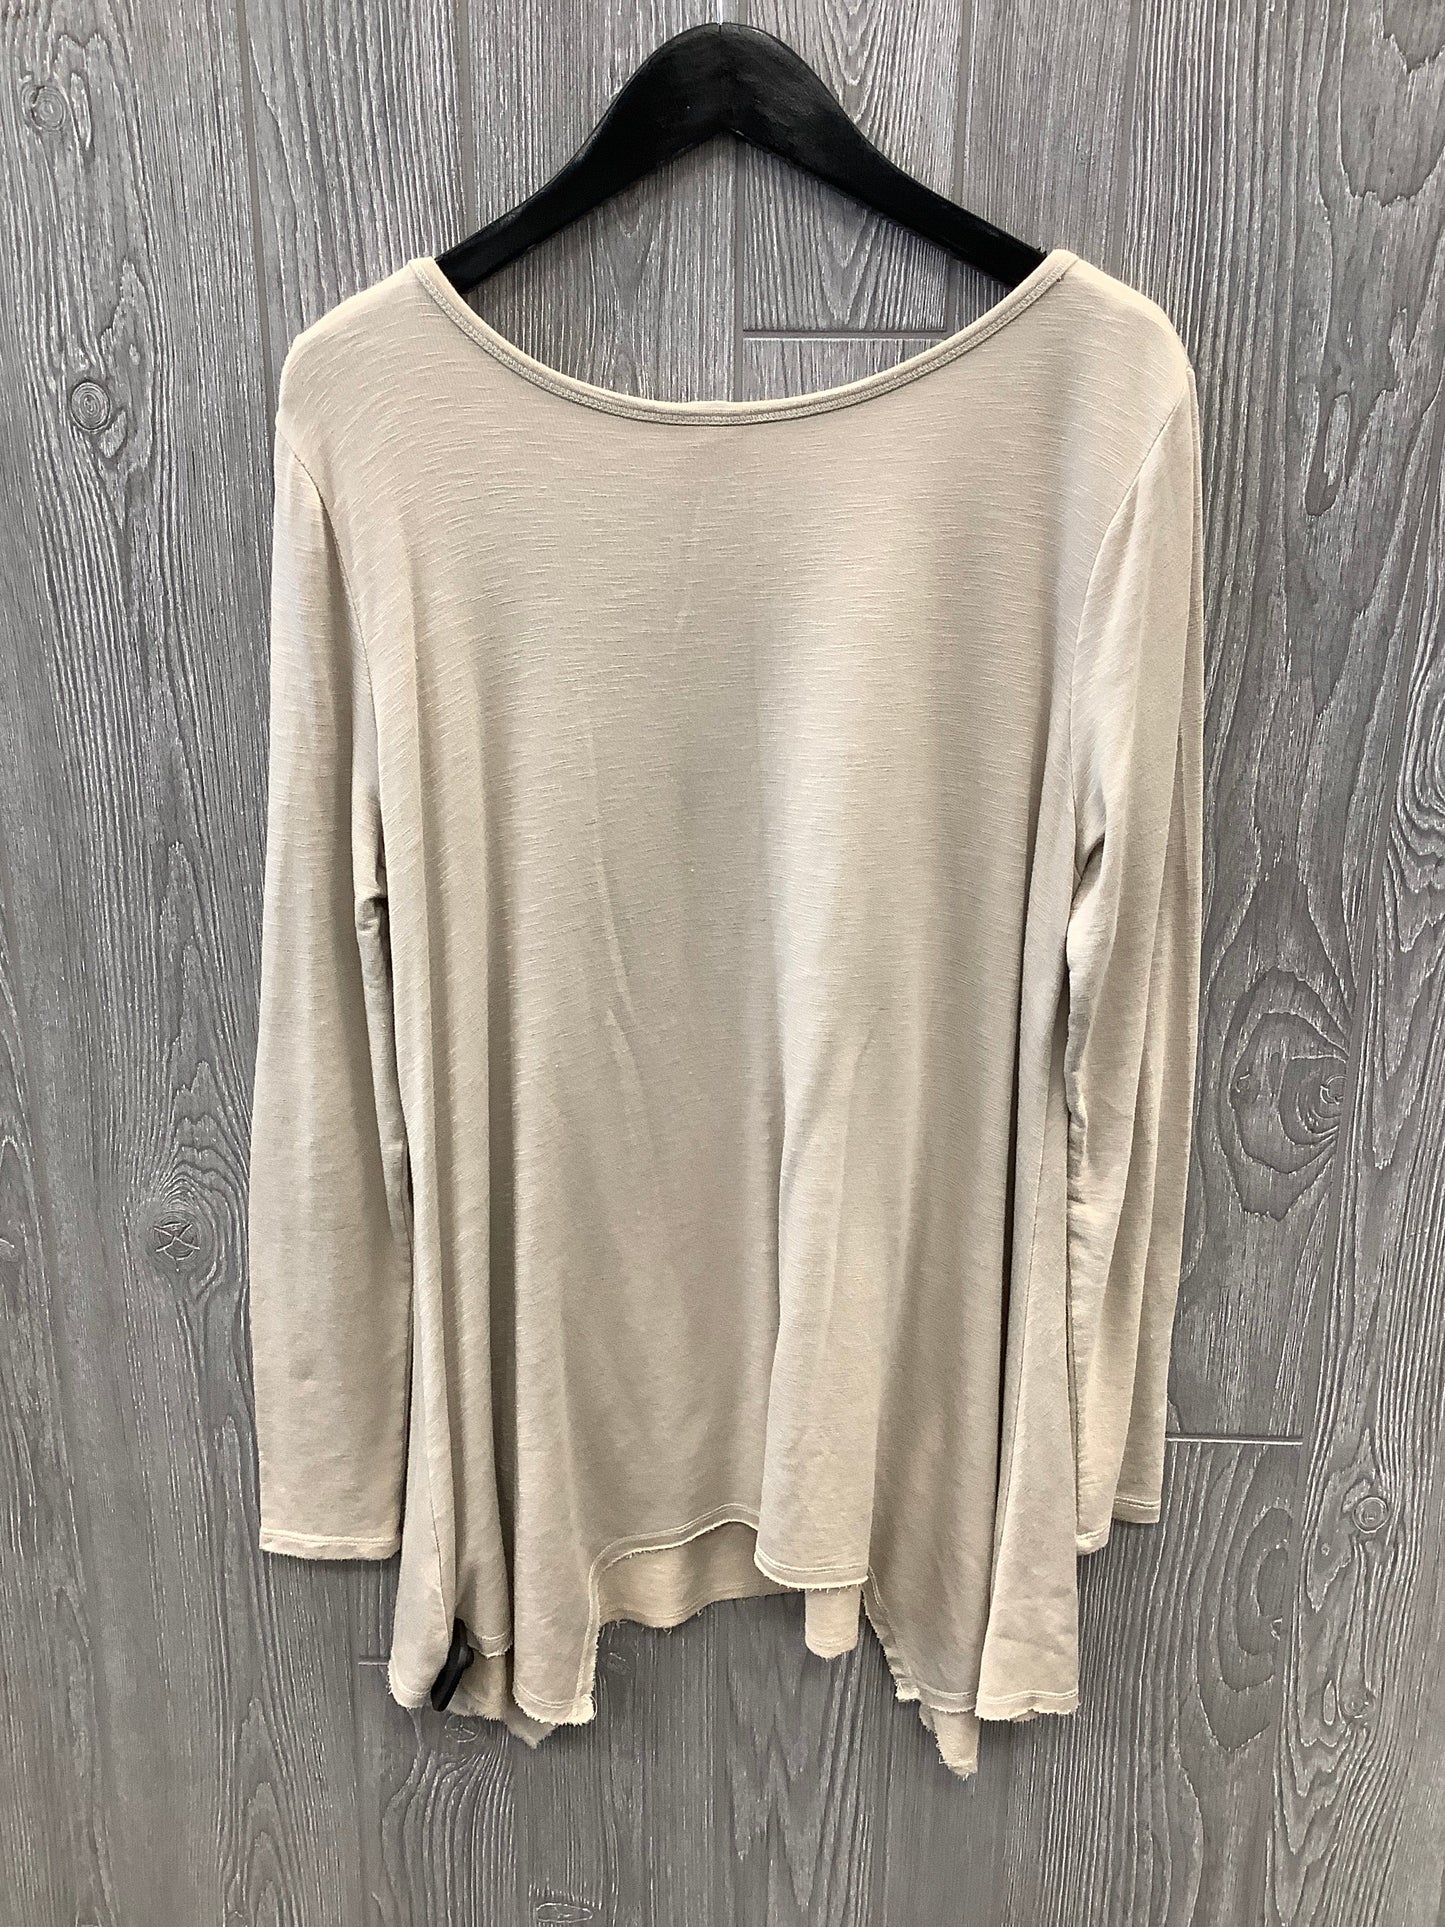 Top Long Sleeve By Knox Rose  Size: 1x